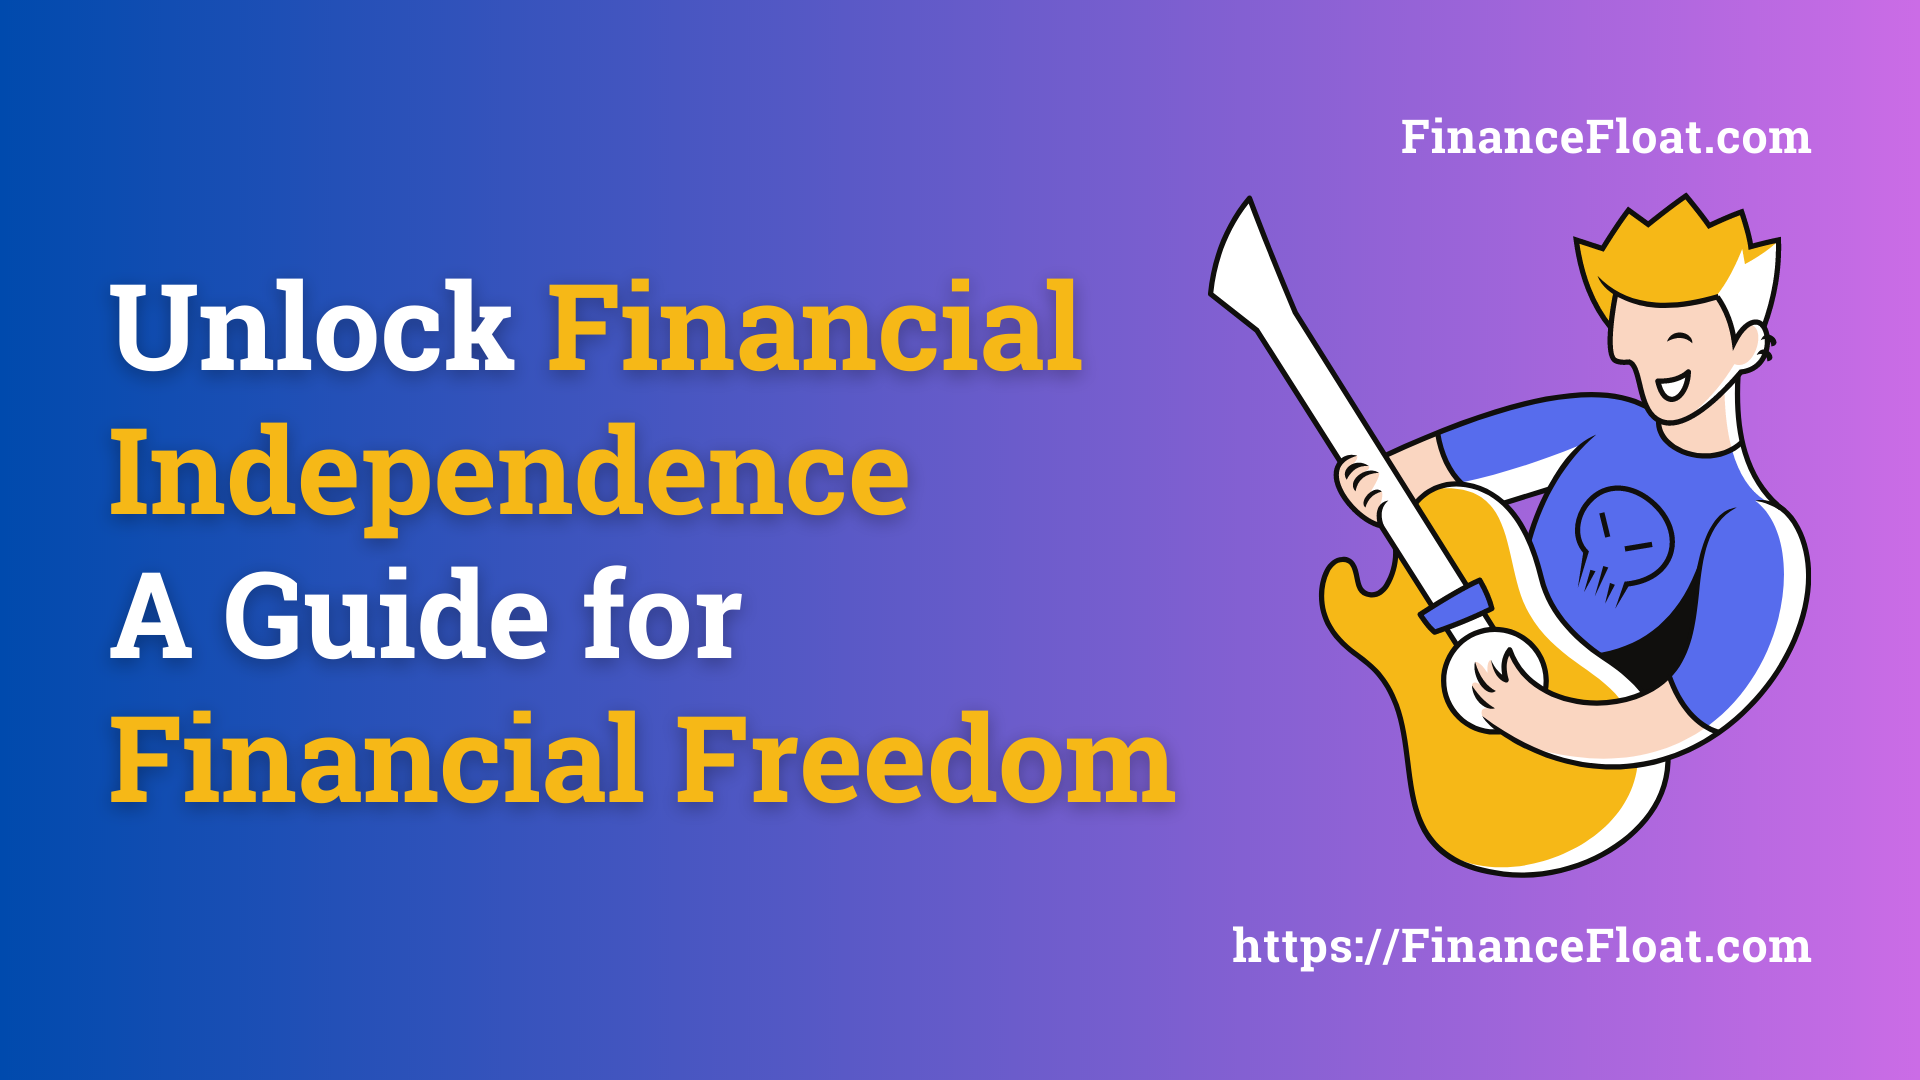 Unlock Financial Independence A Guide for Financial Freedom